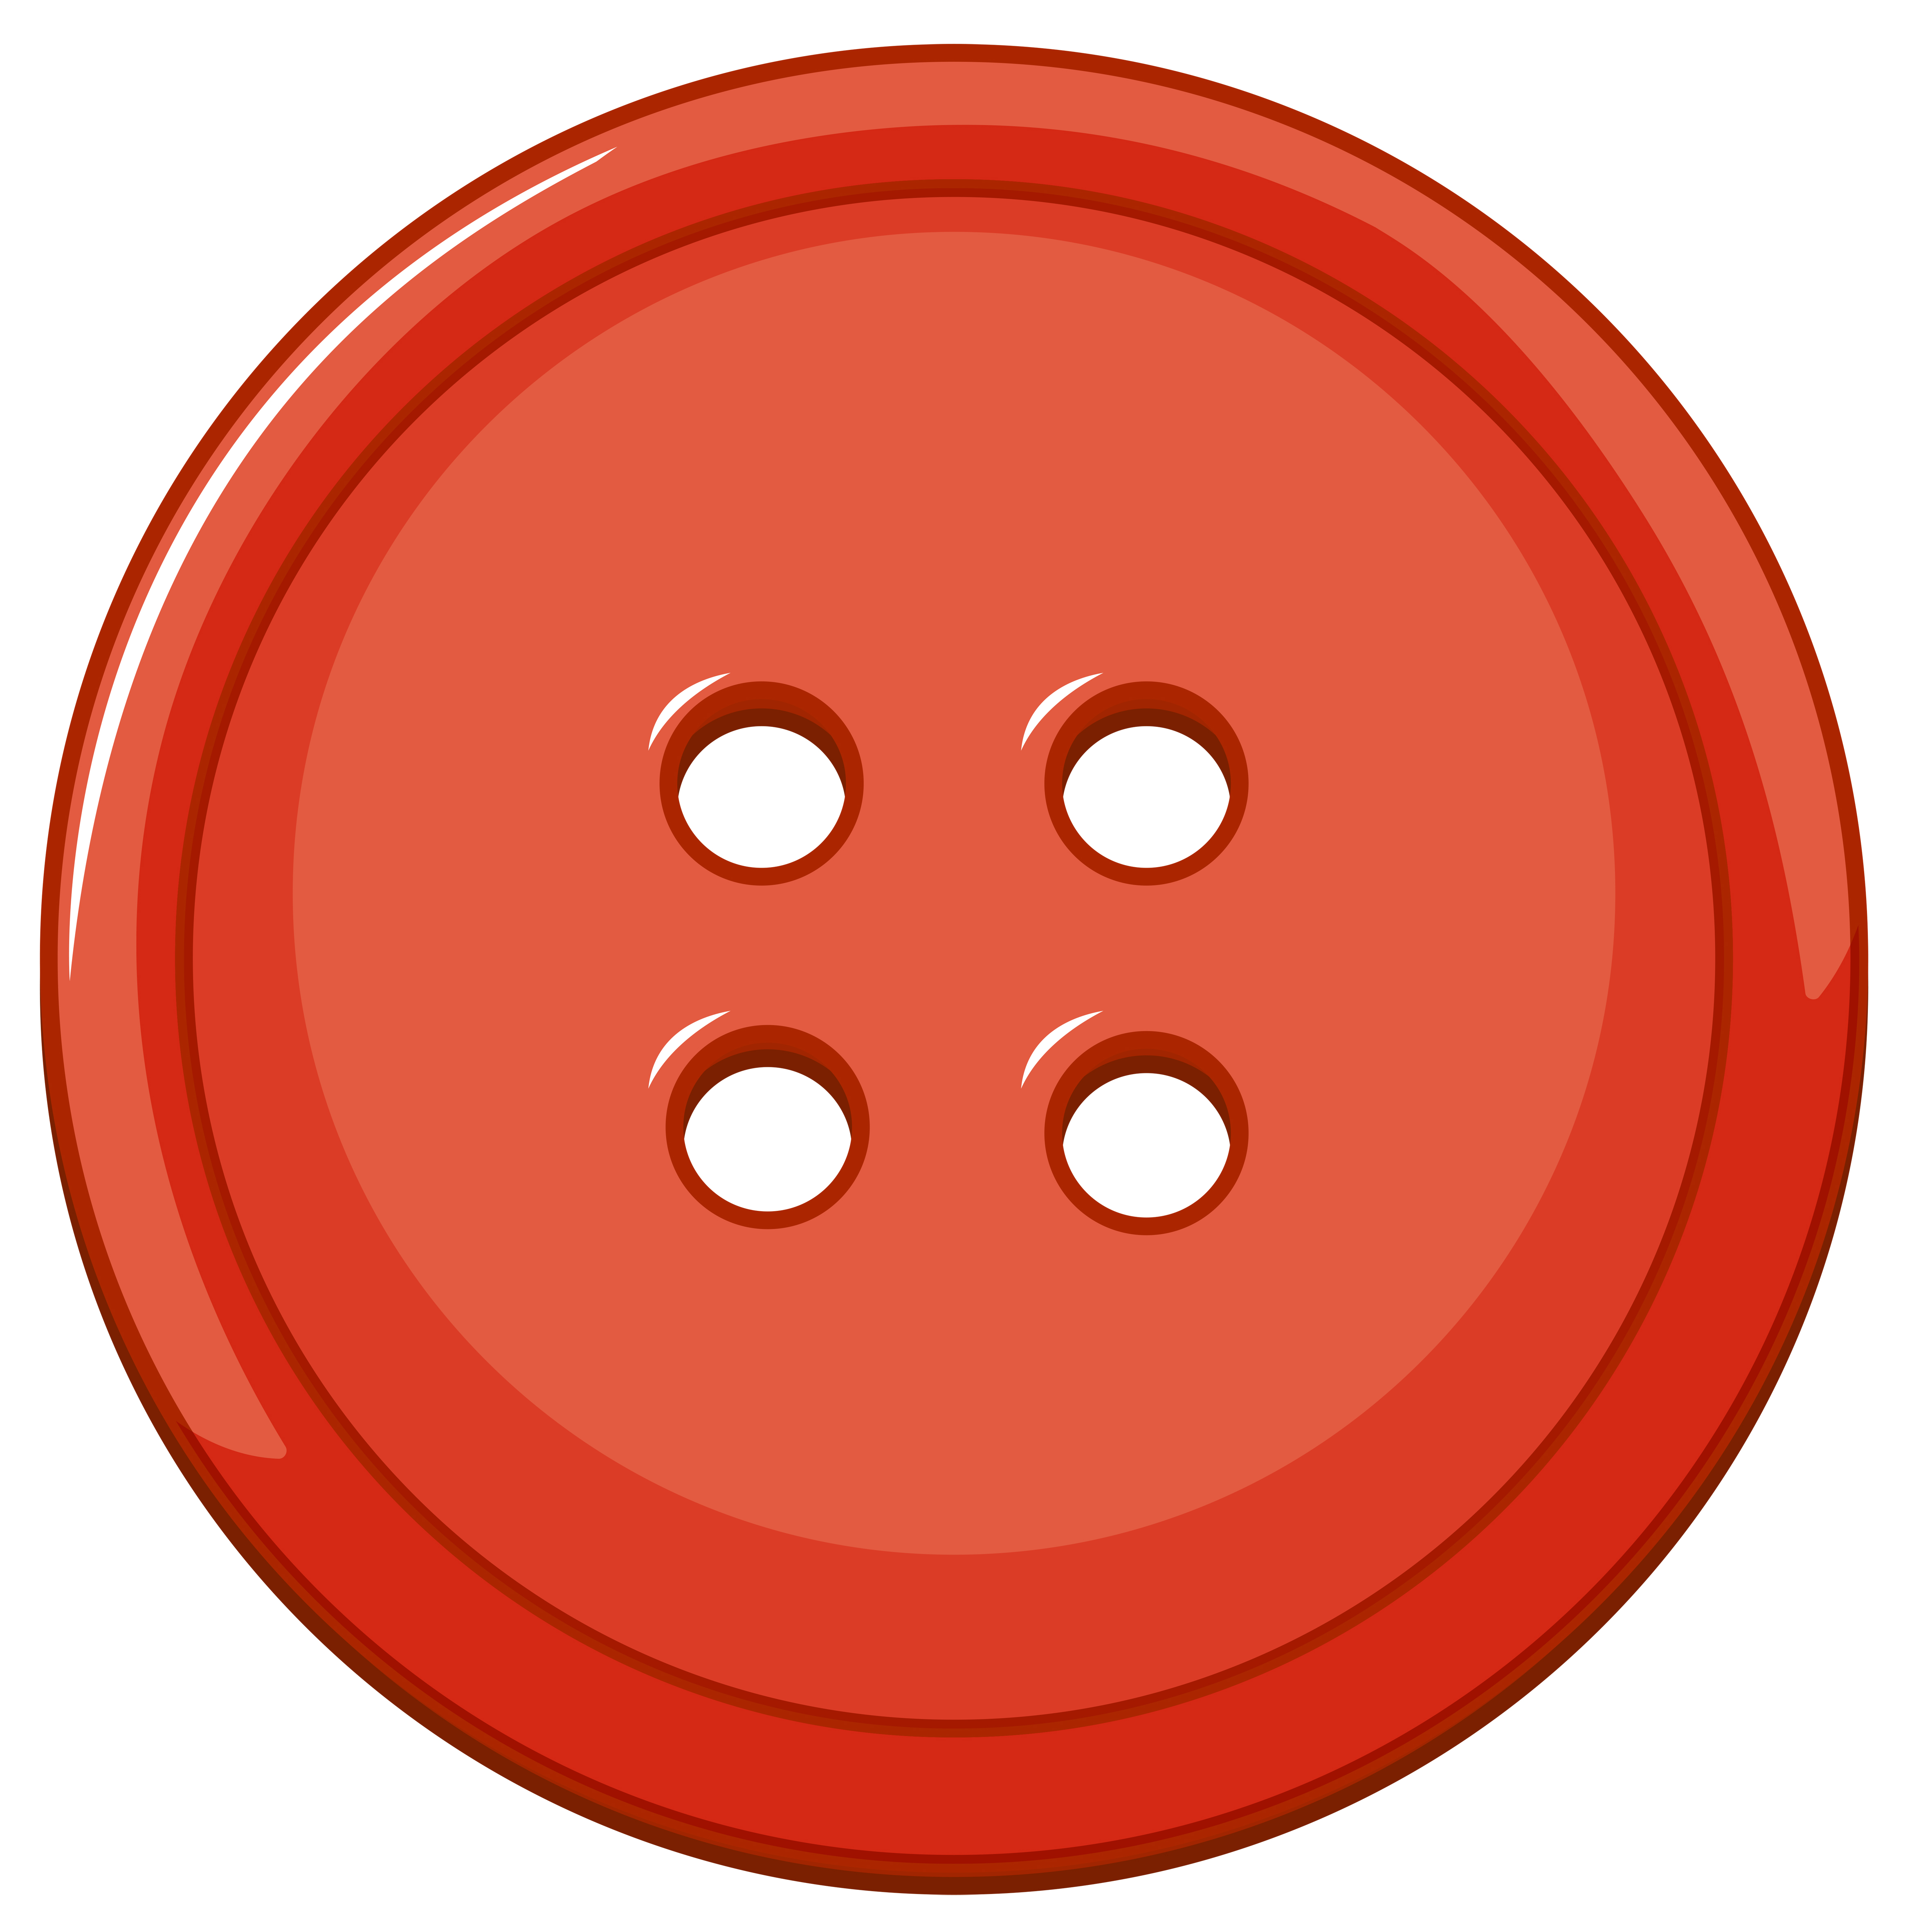 Red Button Clip Art Red Button Image Pete The Cat Buttons Clip Art - Riset